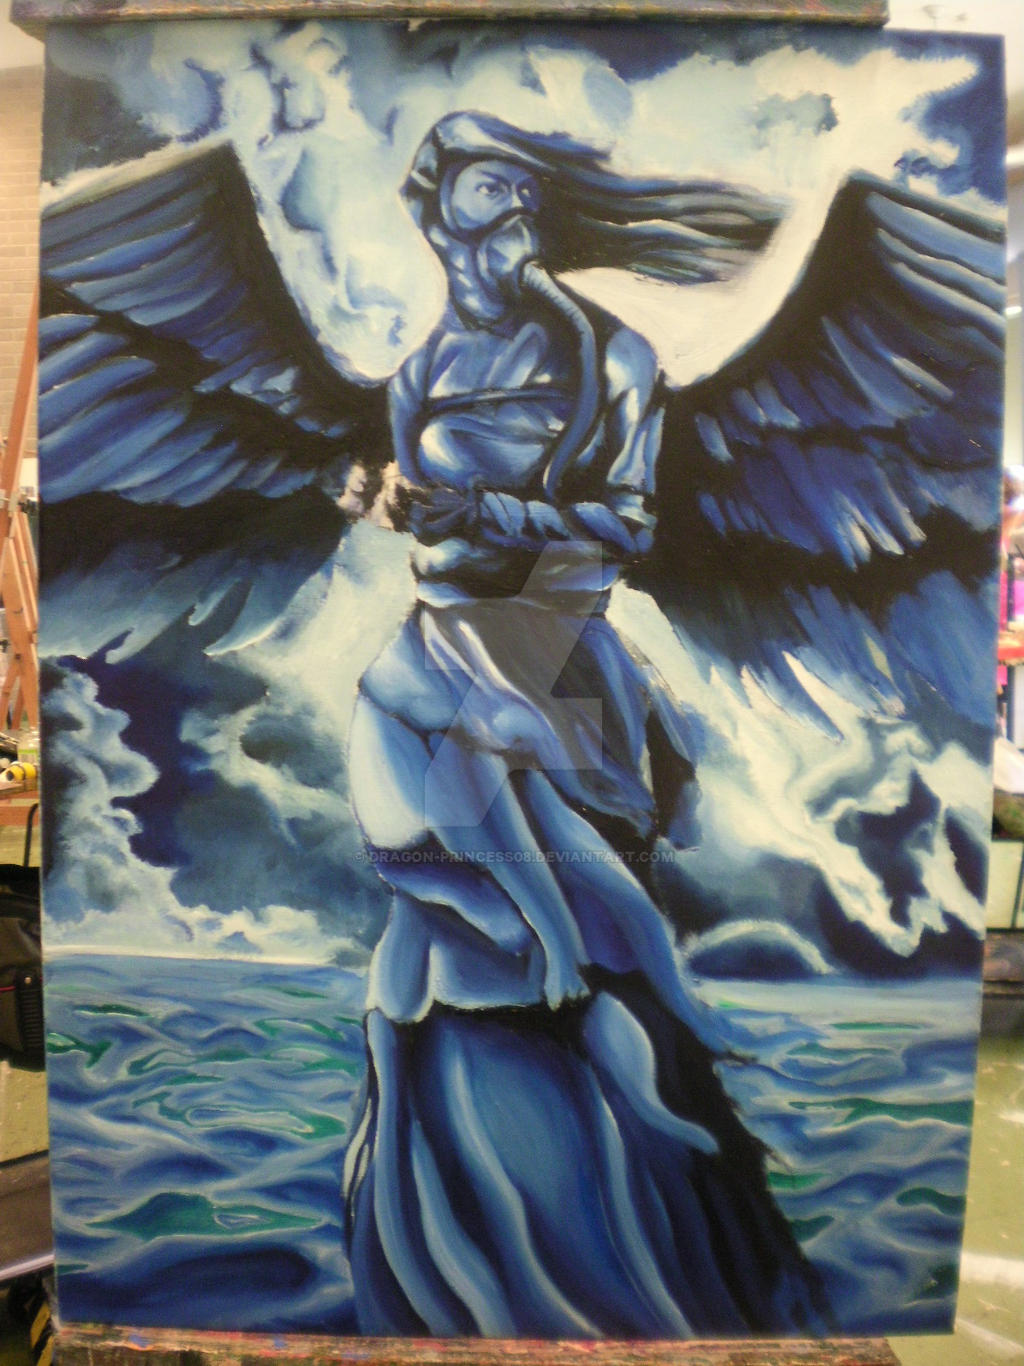 My friend's painting of a blue angel